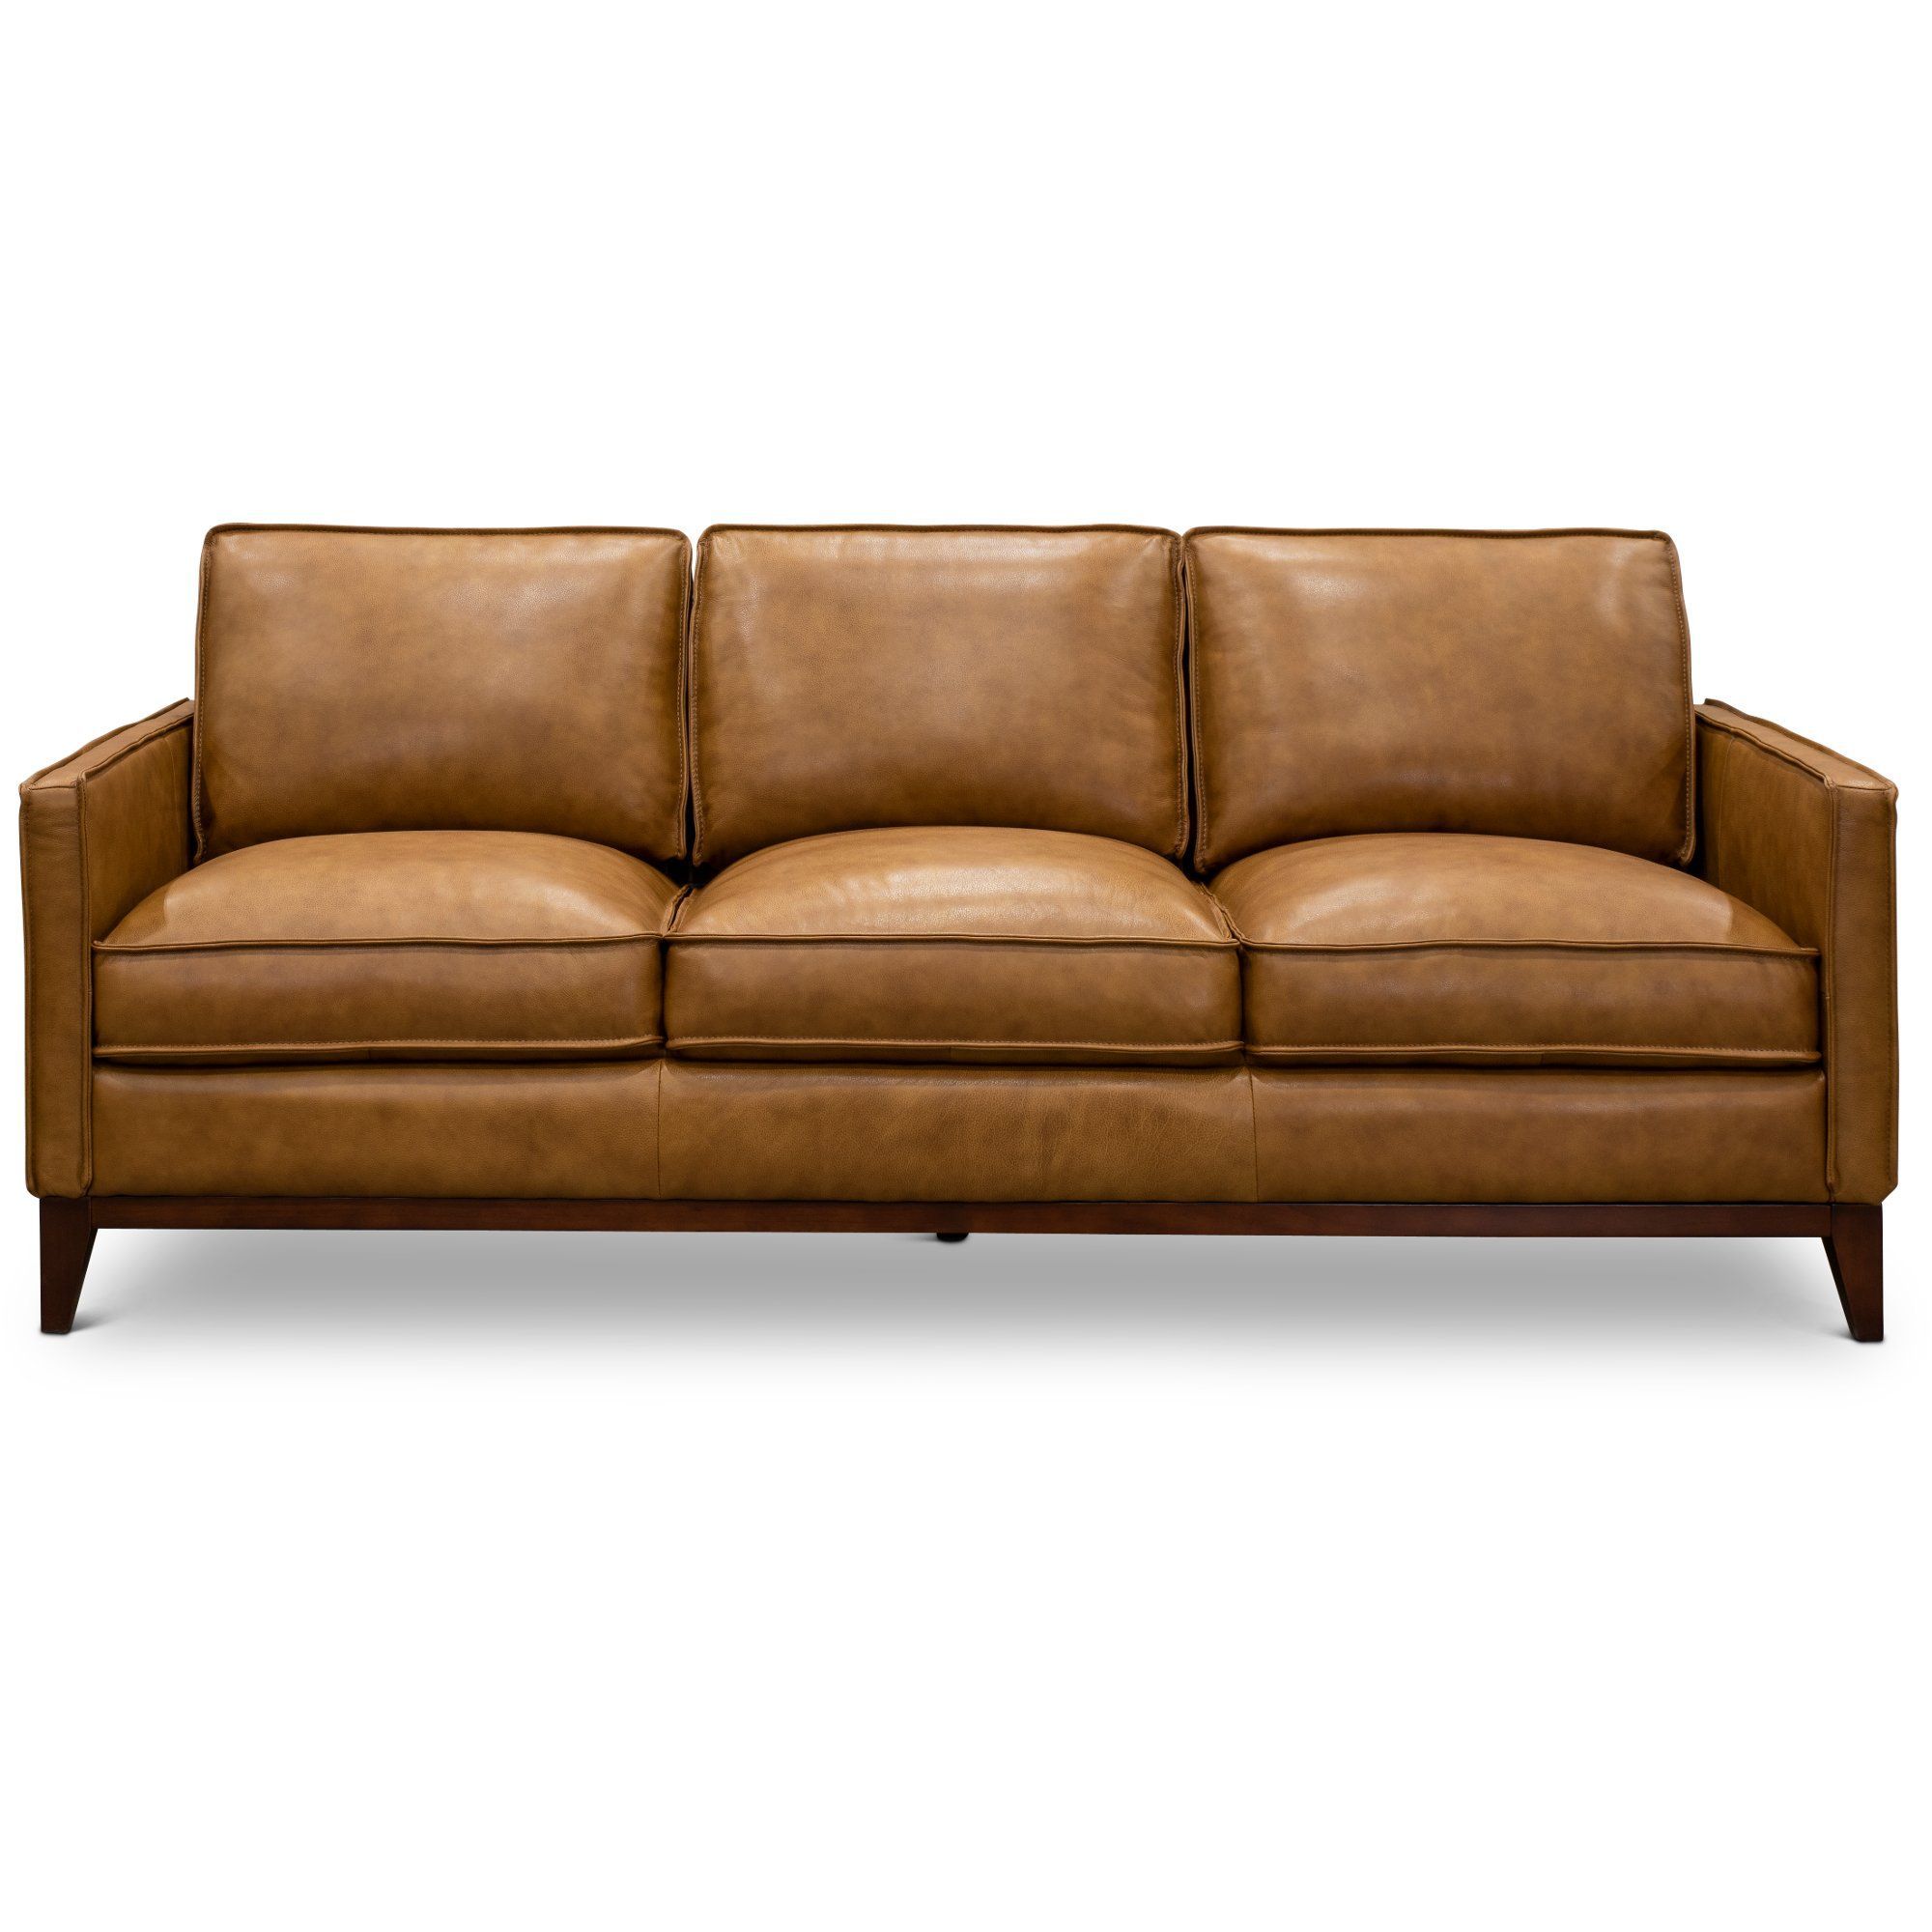 Mid Century Modern Camel Brown Leather Sofa – Newport – Dekorationcity In Mid Century Modern Sofas (View 13 of 20)